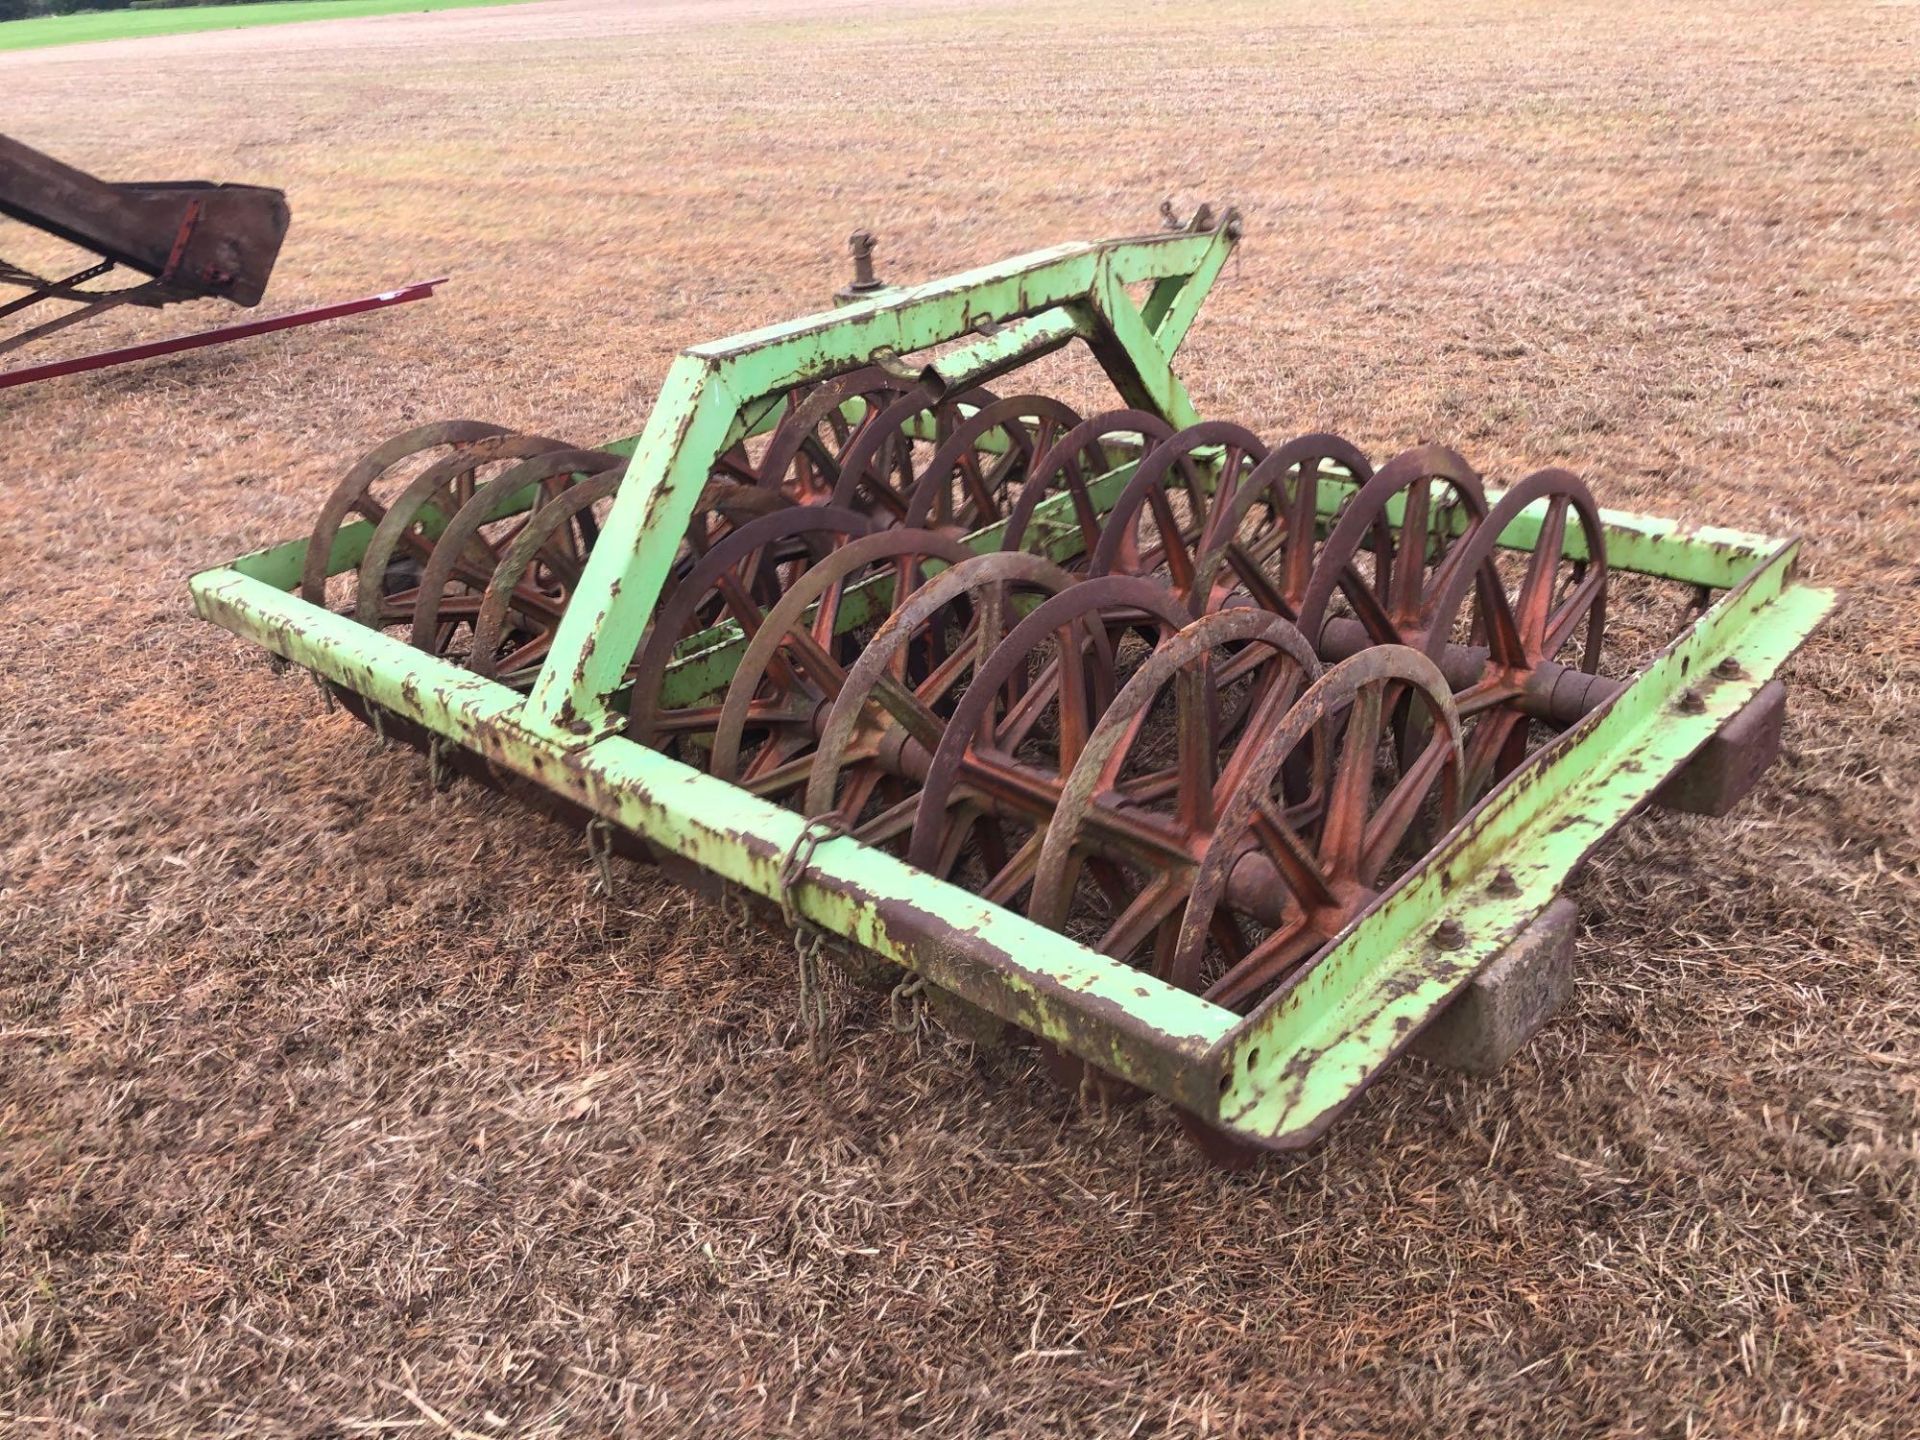 Dowdeswell 88" plough press suited to 5f plough. Model No: 1011. Serial No: 6754 - Image 2 of 2